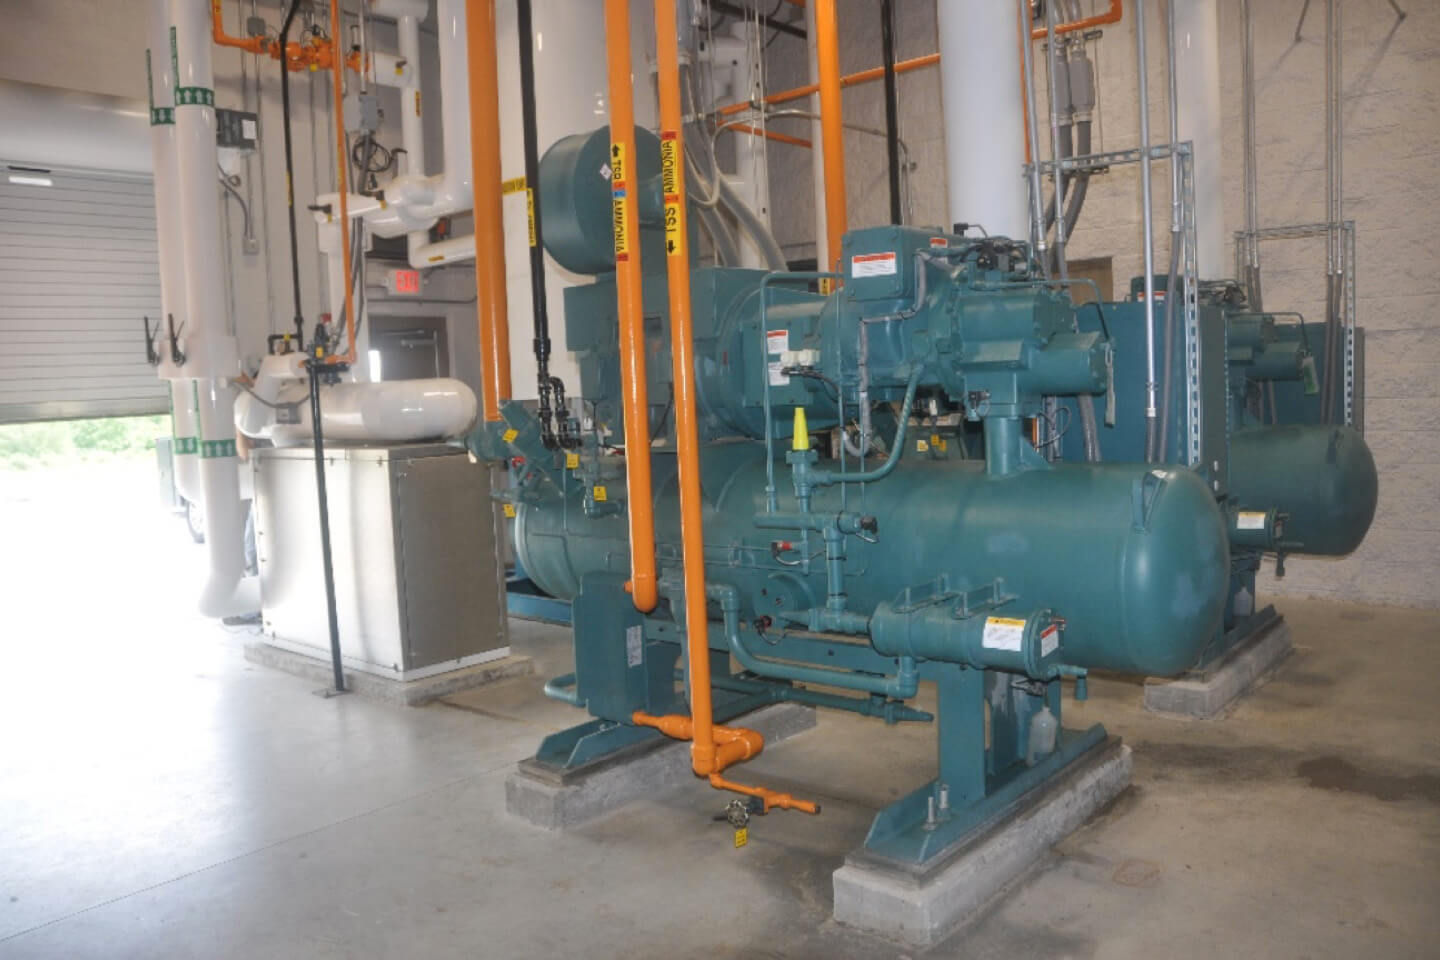 New Ammonia Refrigeration System Vegetable Processing Facility